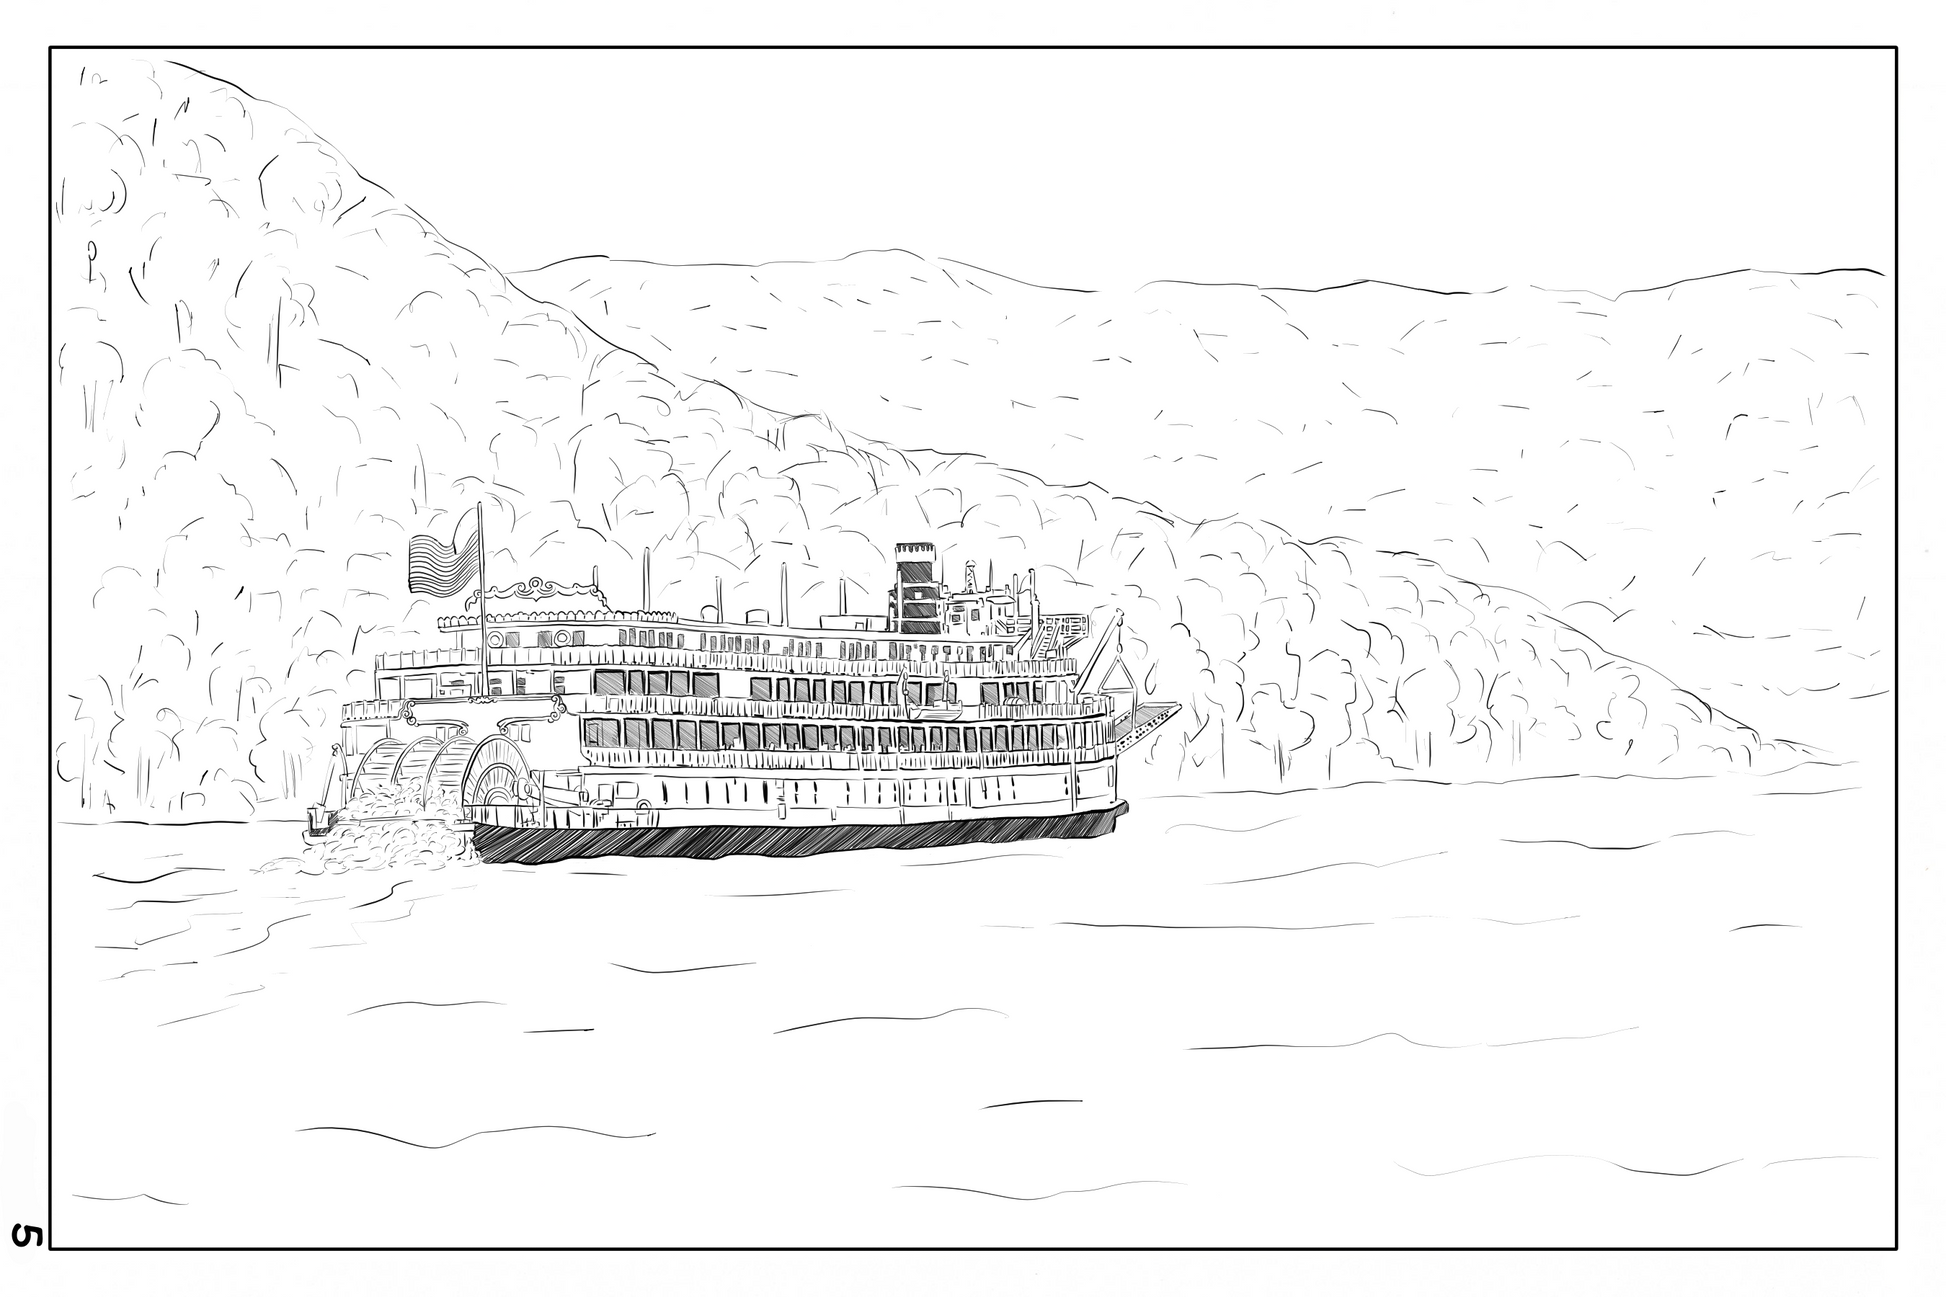 Watercolor coloring page of the Southern Belle in Chattanooga Tennessee, 140lbs cold pressed watercolor paper